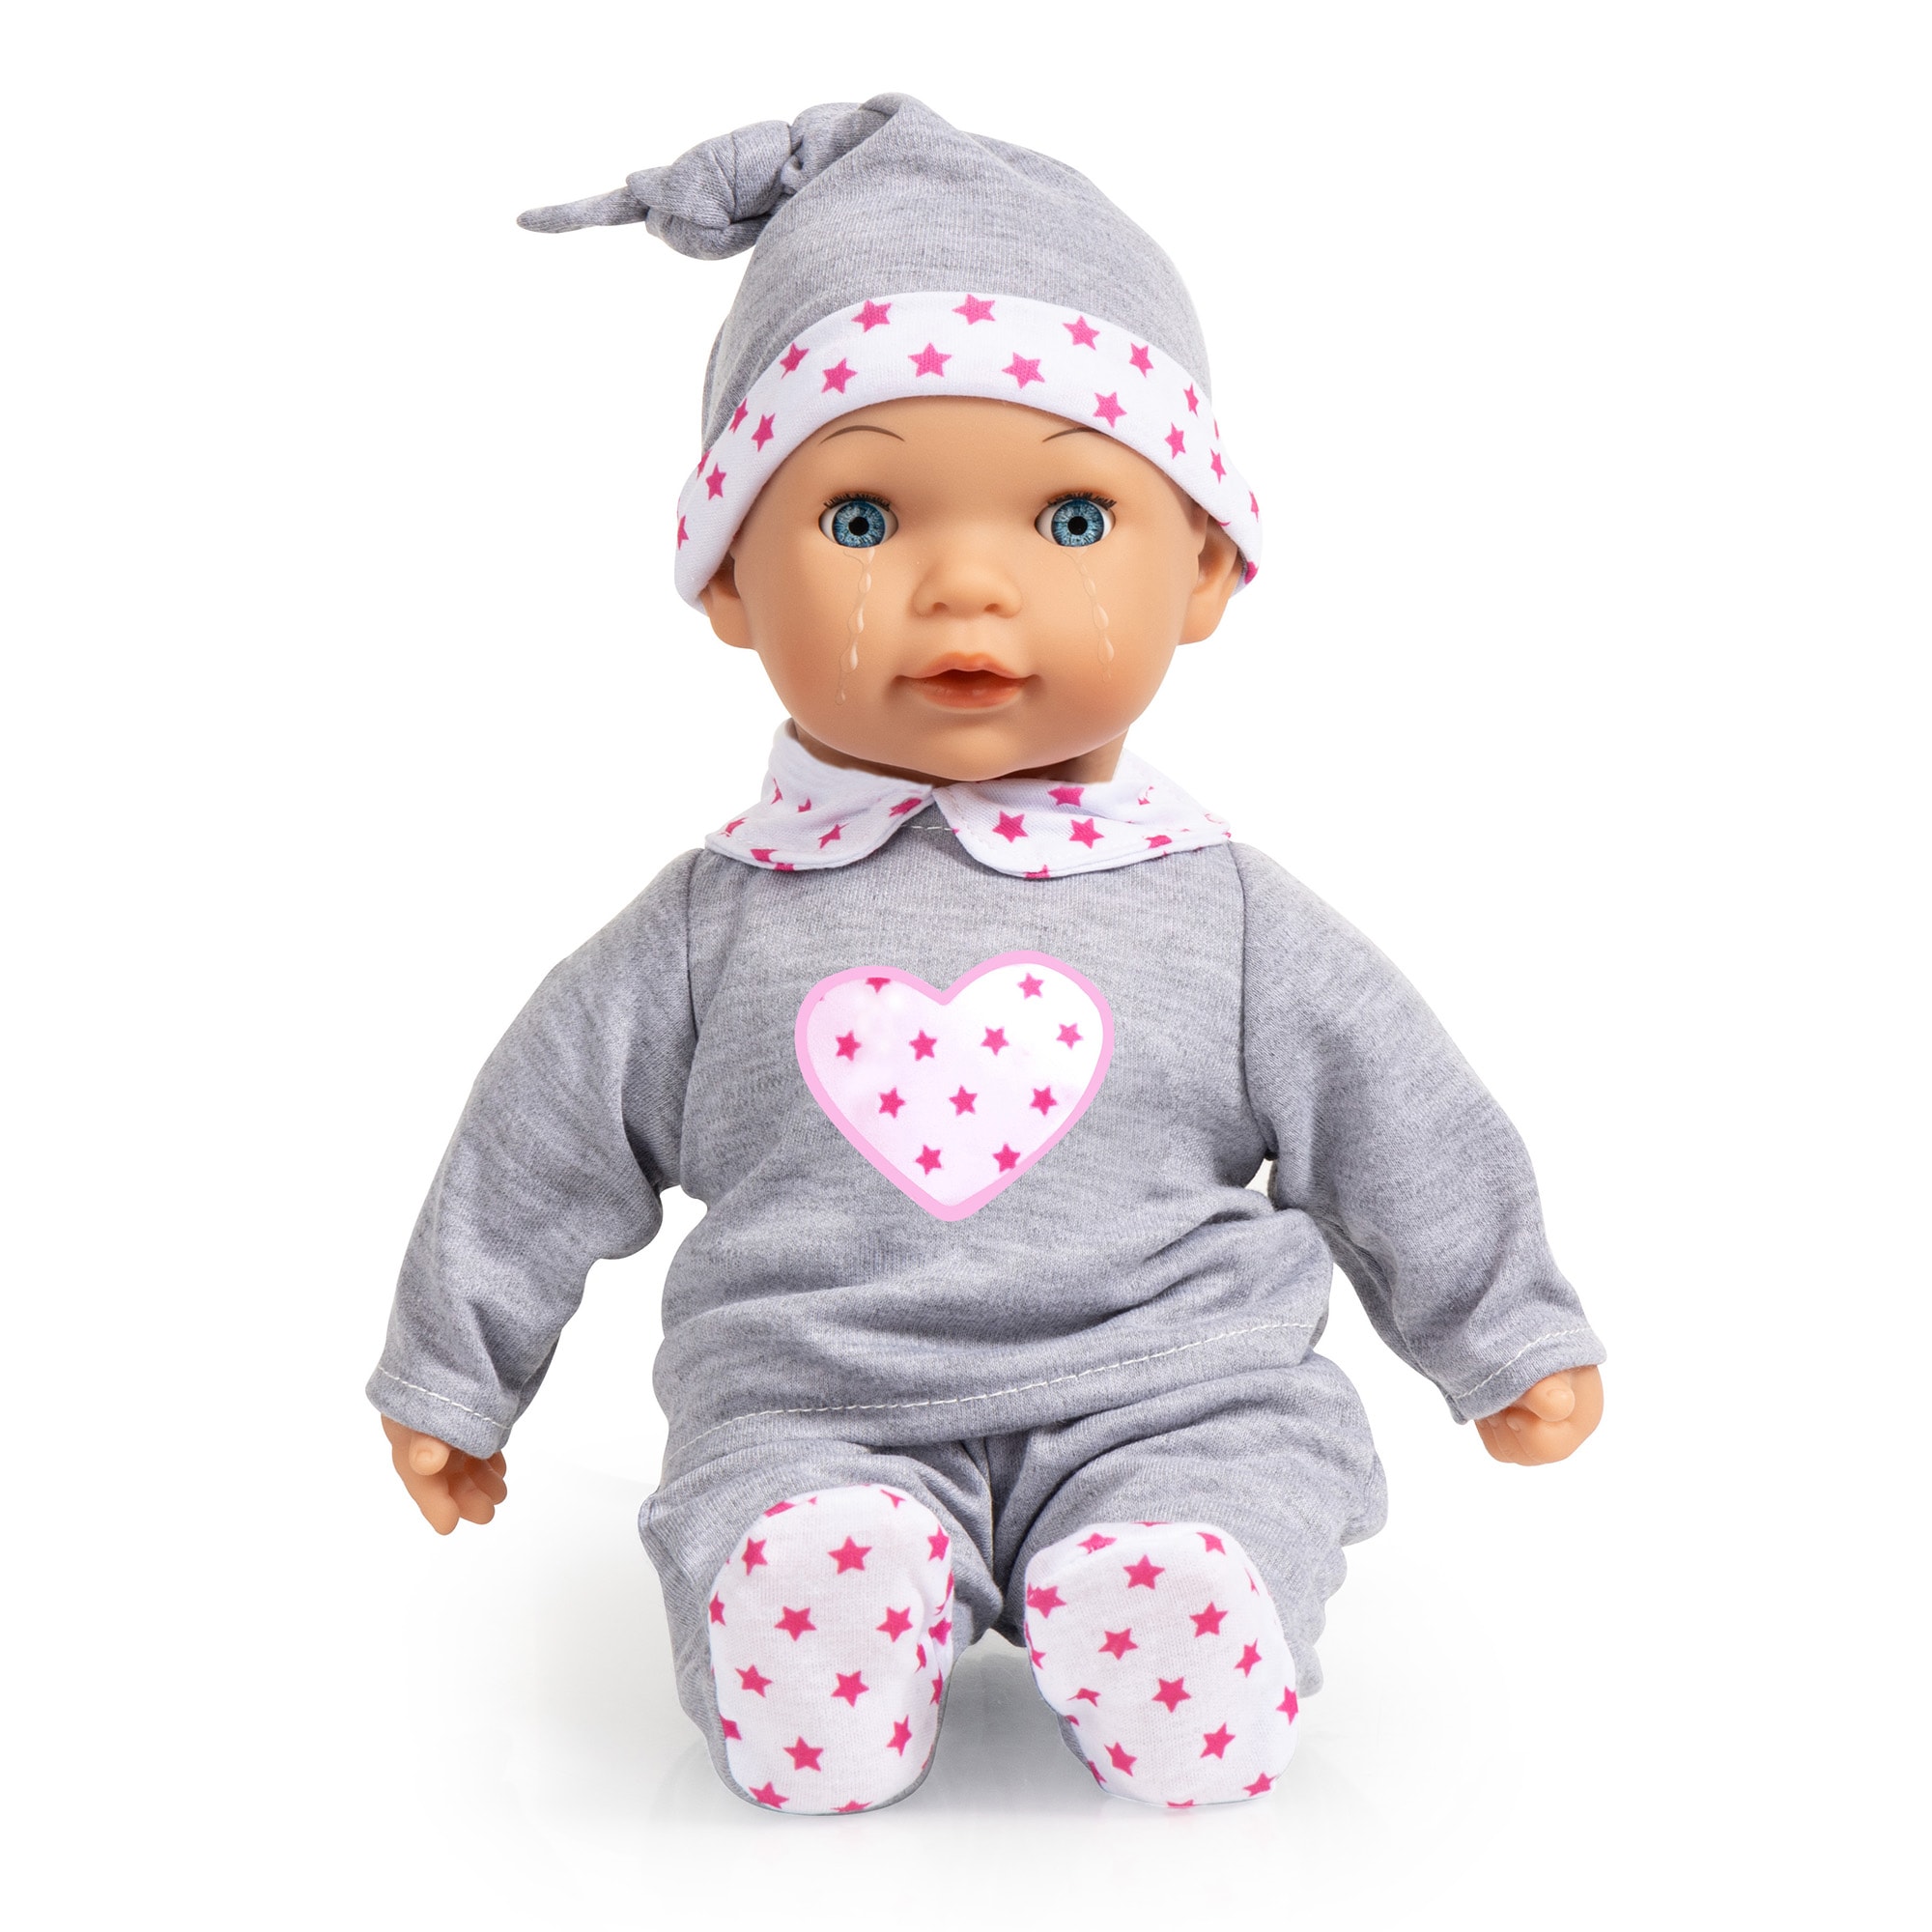 Bayer Cute Realistic Baby Doll Tears Baby 15-in - Cries, Laughs